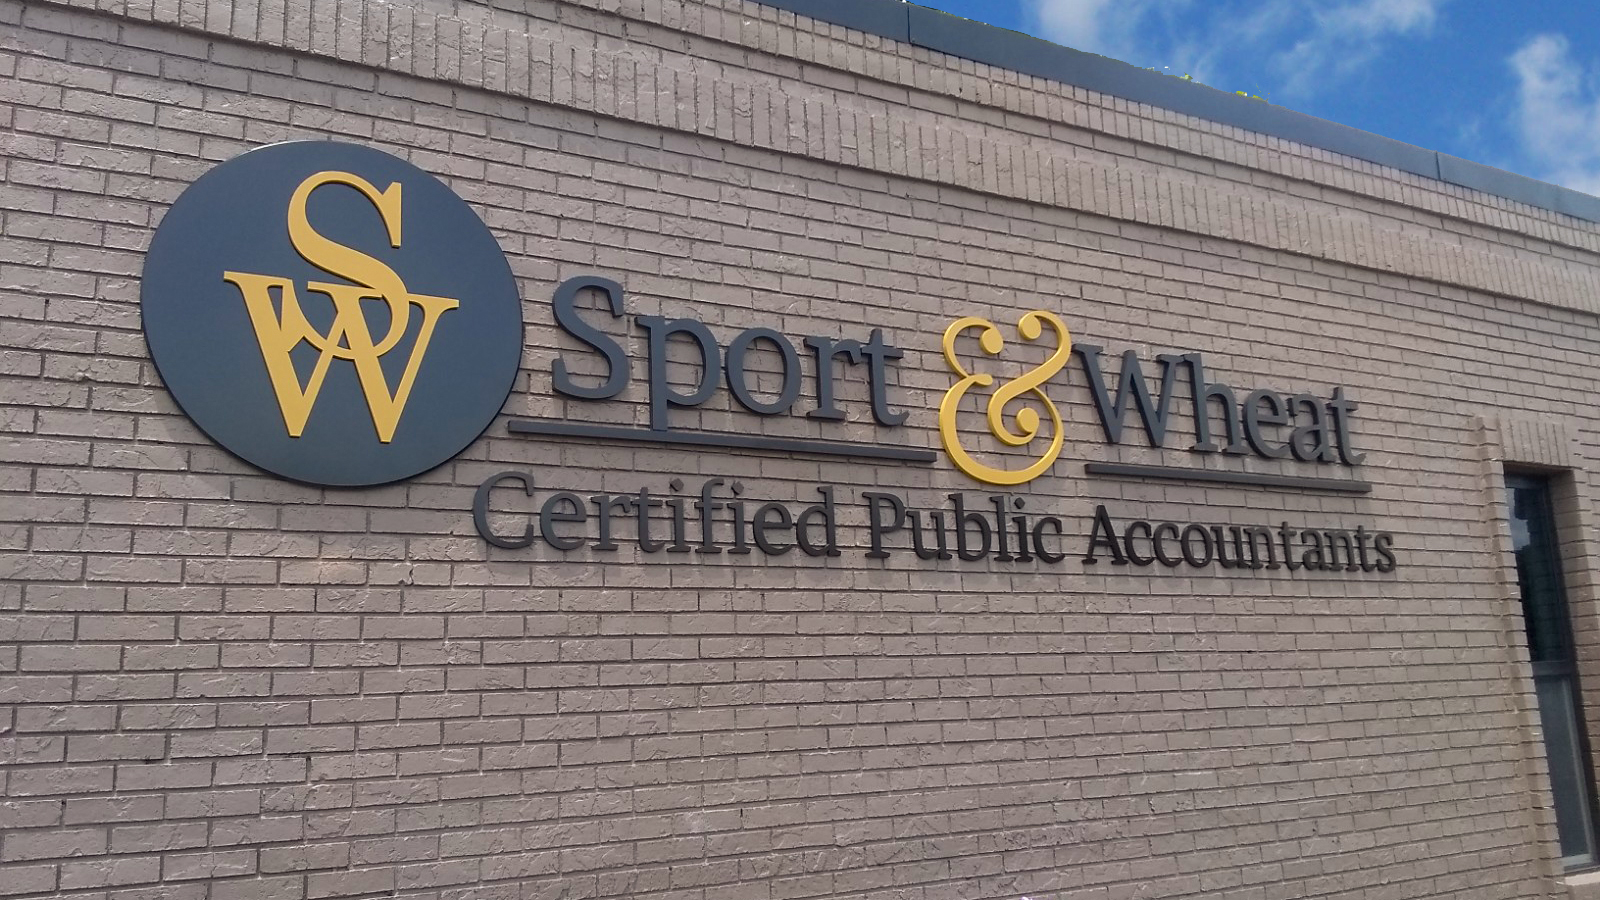 Exterior Dimensional Letter Signage for Sport & Wheat CPA | PVC Letters and Logos 